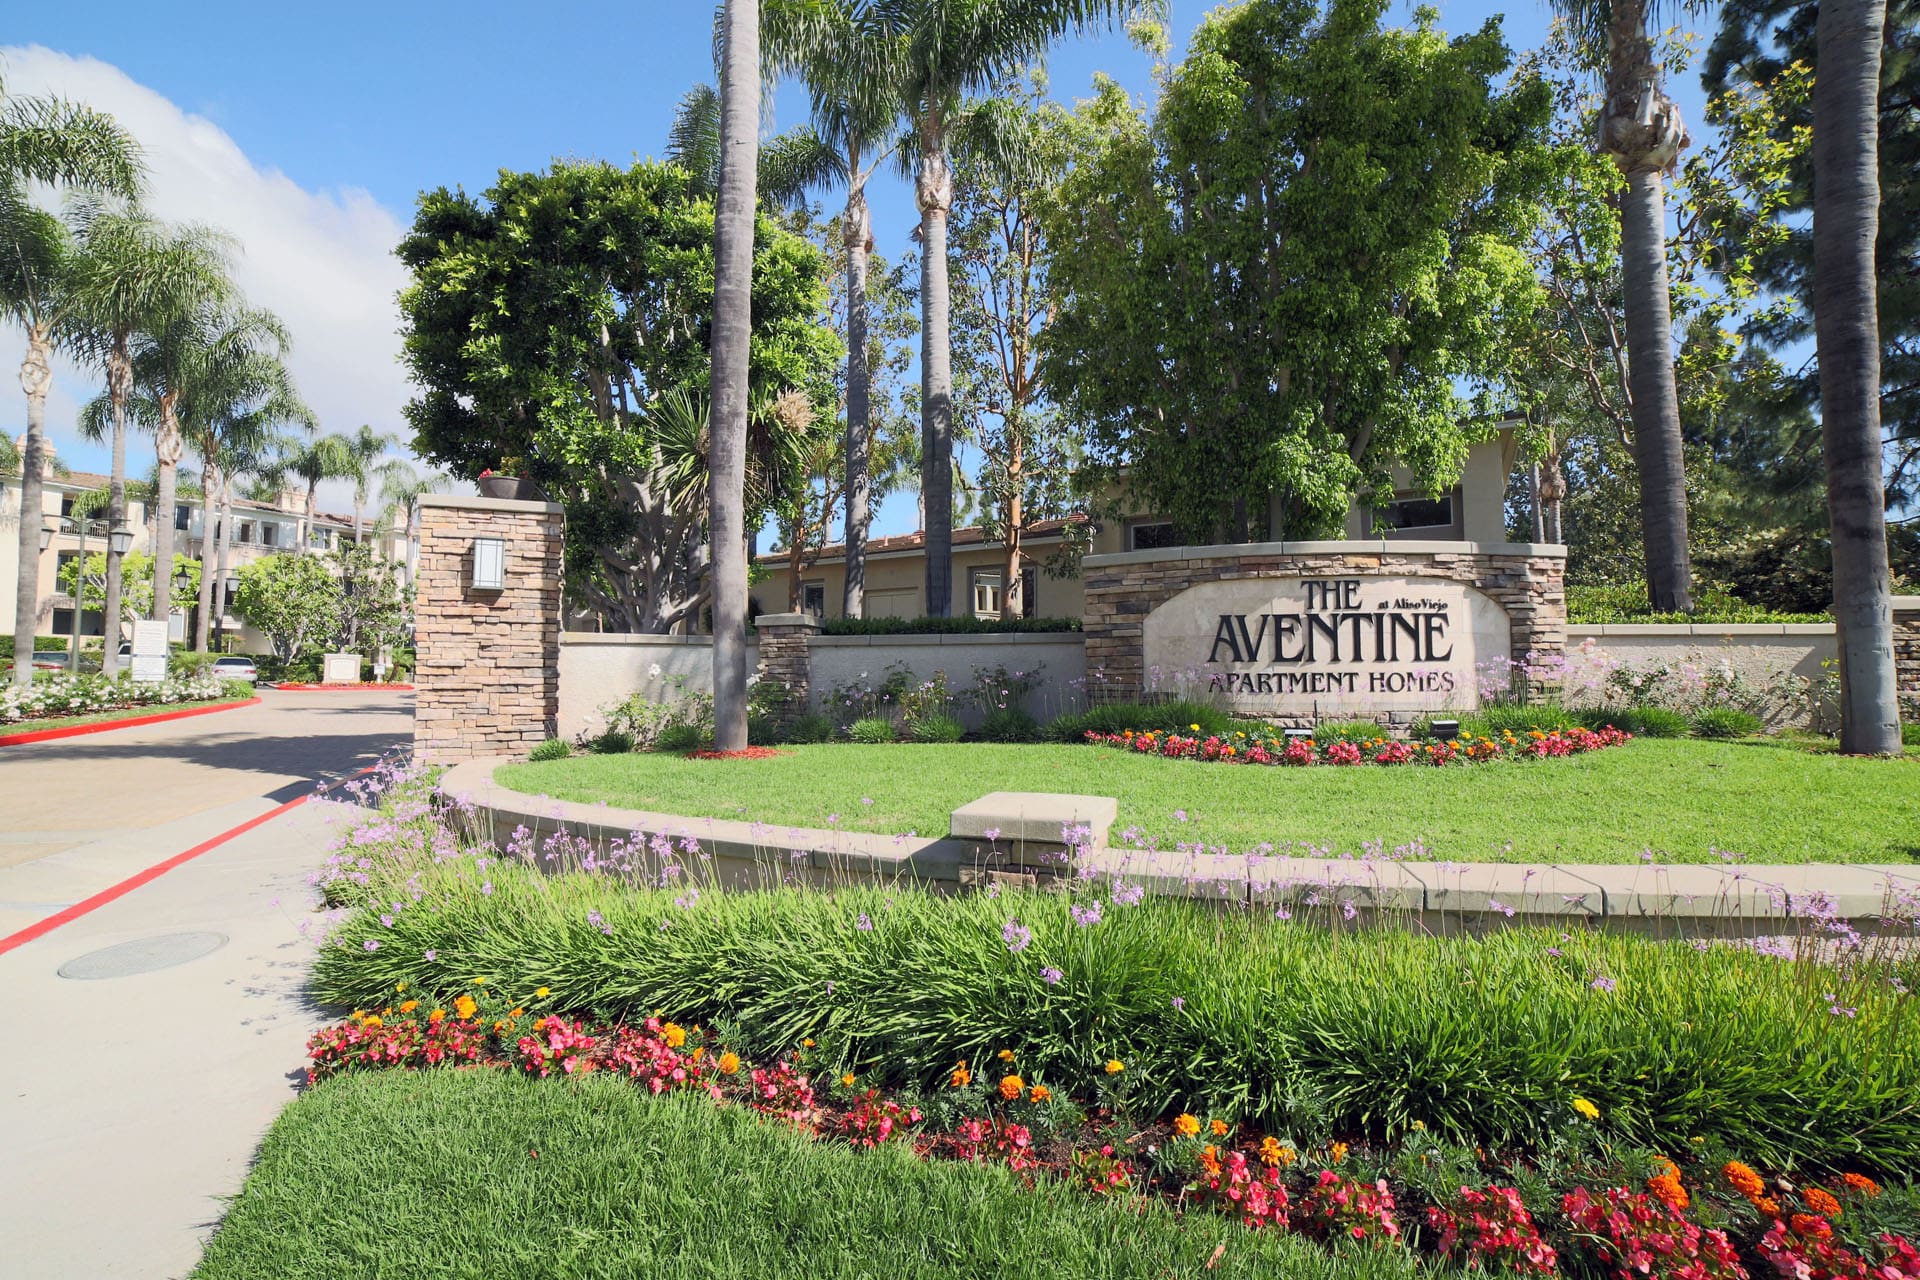 The Aventine sign